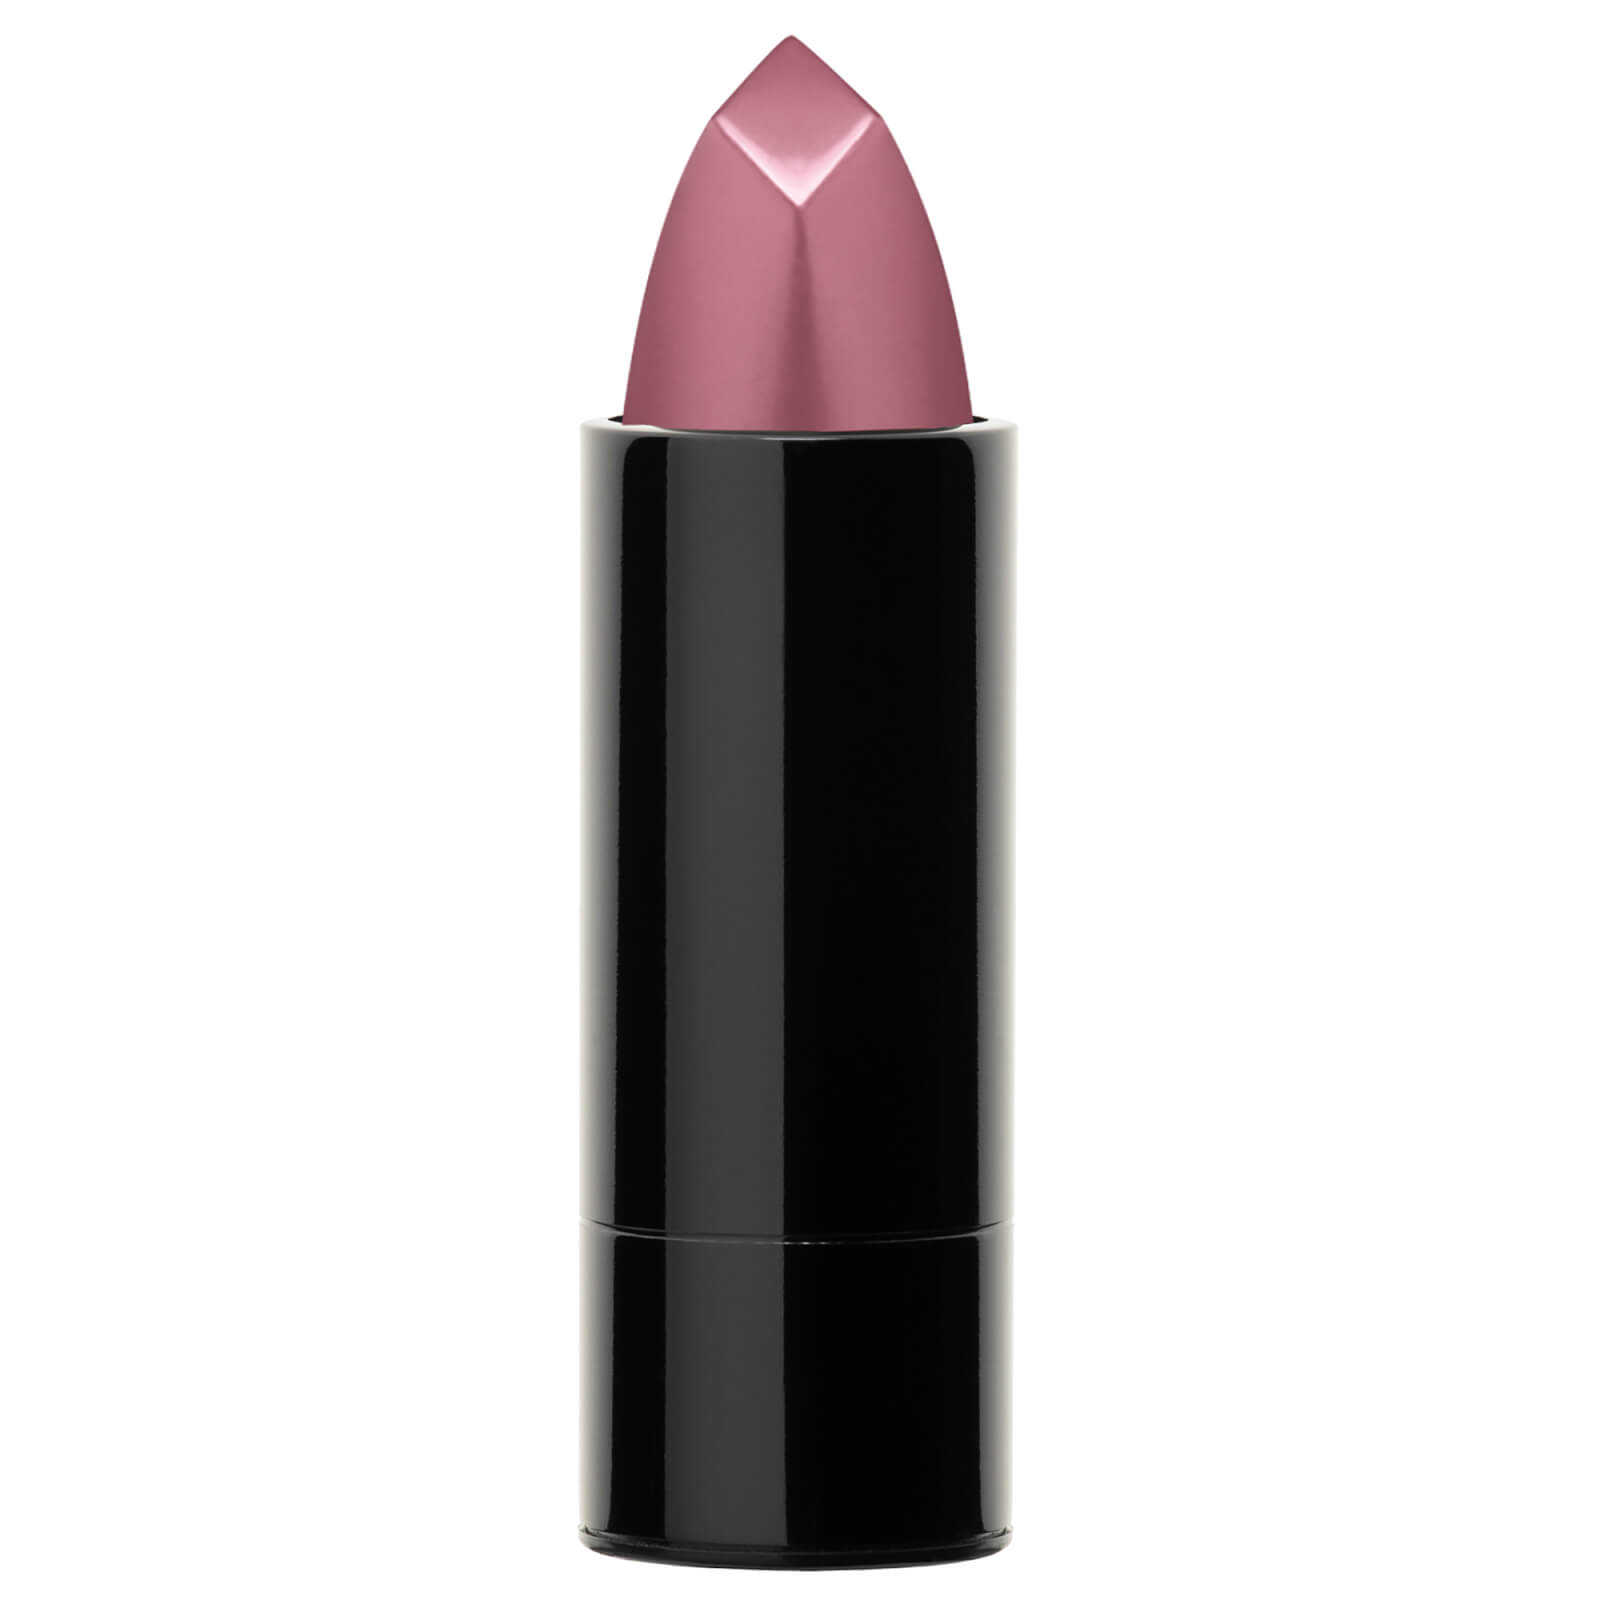 Serge Lutens Fard A Levres Lipstick Refill 2.3g (Various Shades) - 21 Remords Boomerang